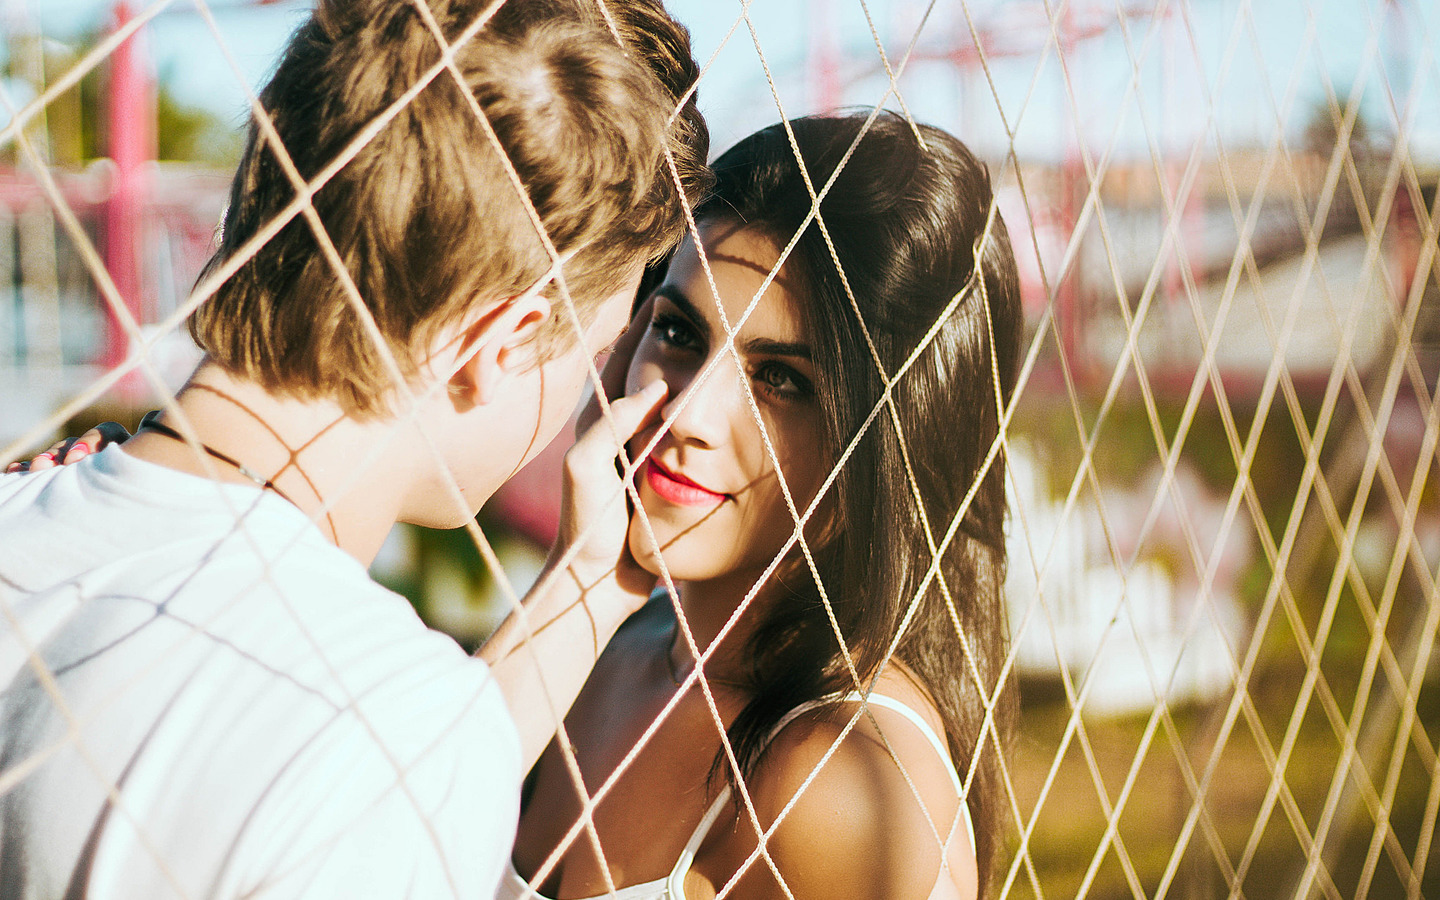 Couple Love At Fence - HD Wallpaper 